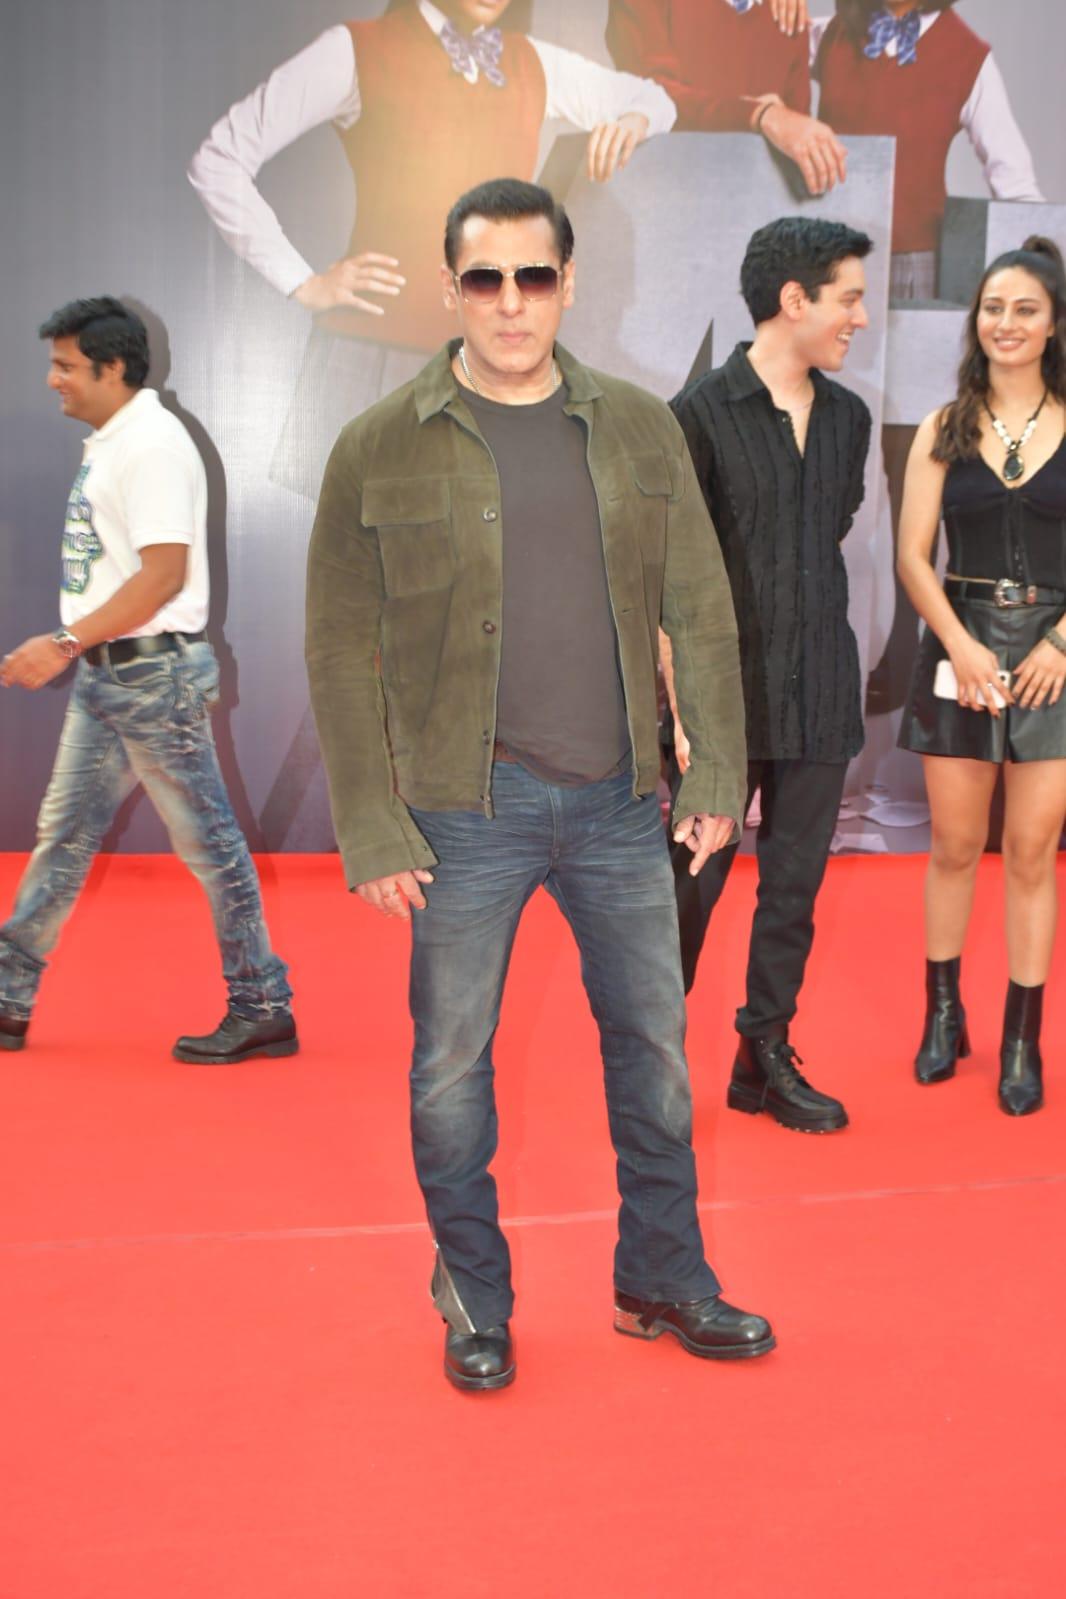 The actor was seen wearing cool blue jeans paired with a plain T-shirt and an olive green jacket